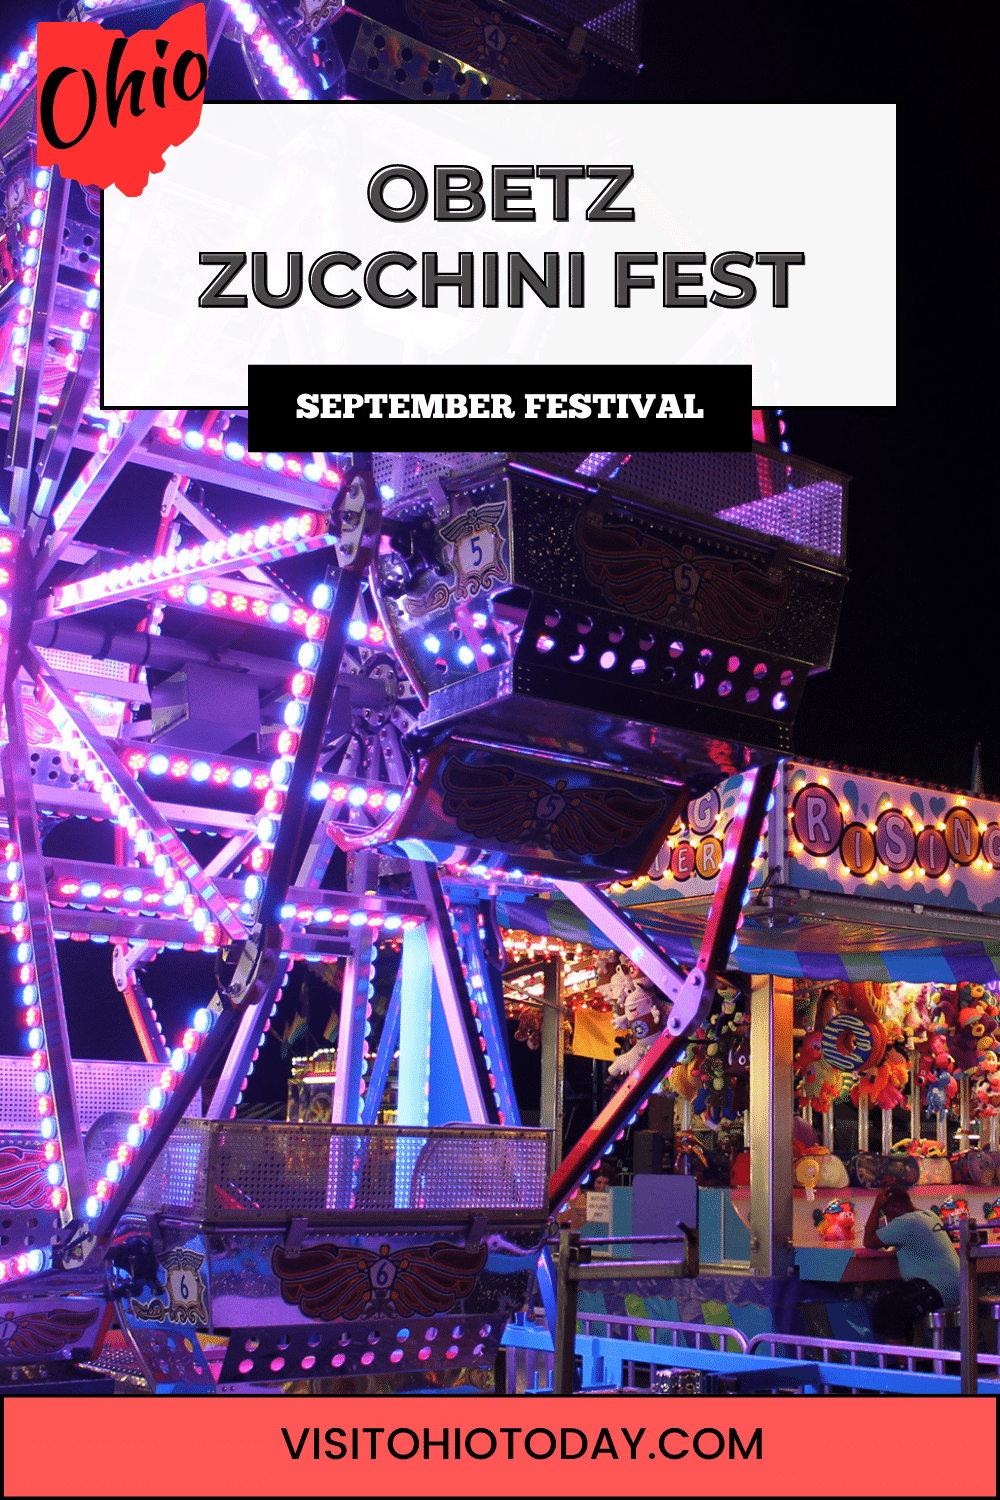 The village of Obetz hosts the Obetz Zucchini Fest annually in early September, a vibrant celebration dedicated to all things zucchini. Taking place at Fortress Obetz, the festival offers free admission to both the festival grounds and the concerts